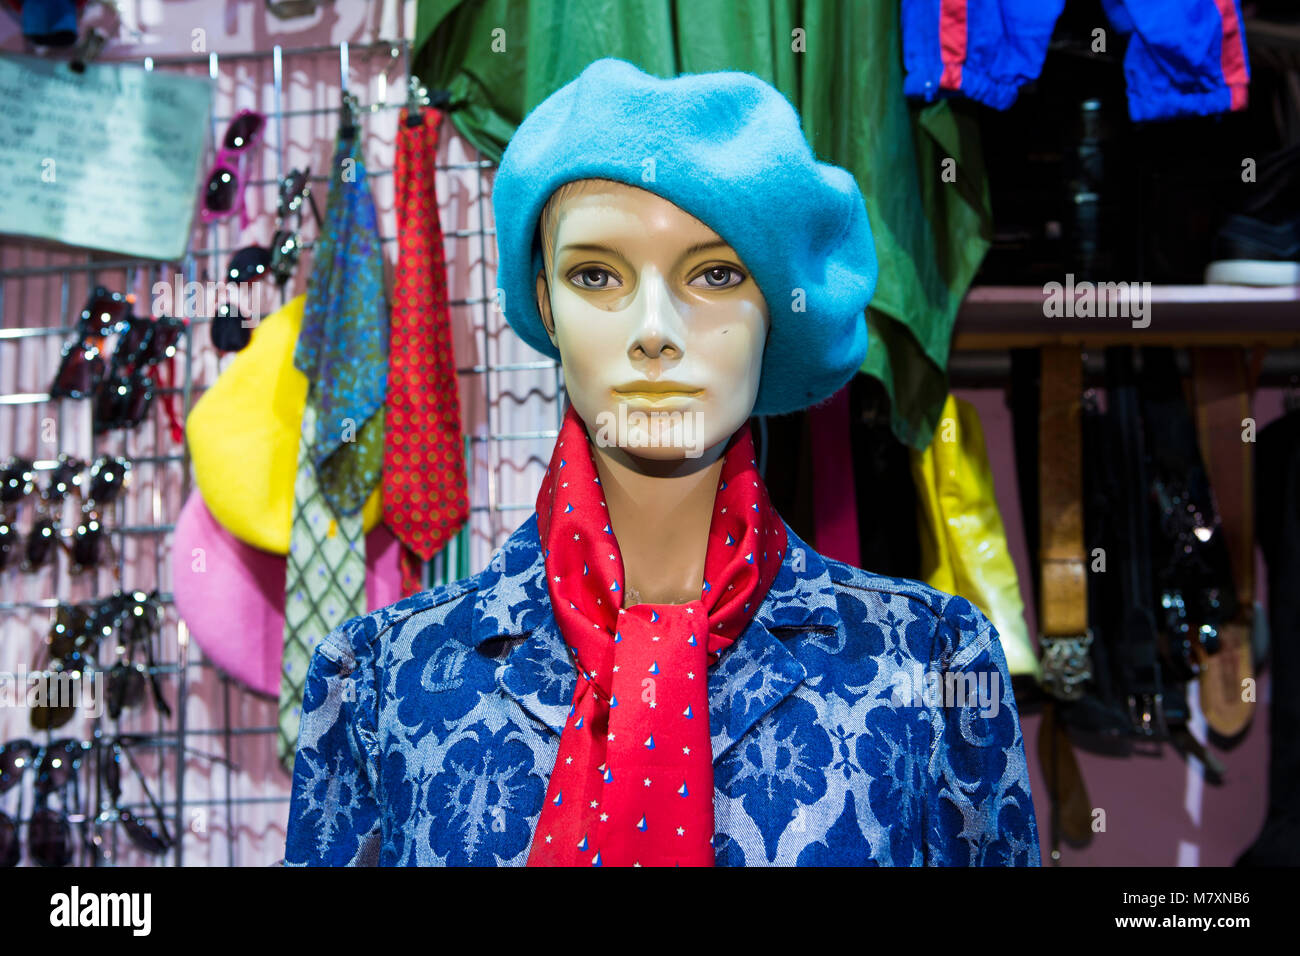 Vintage store, mannequin with hat and silk necktie. Stock Photo